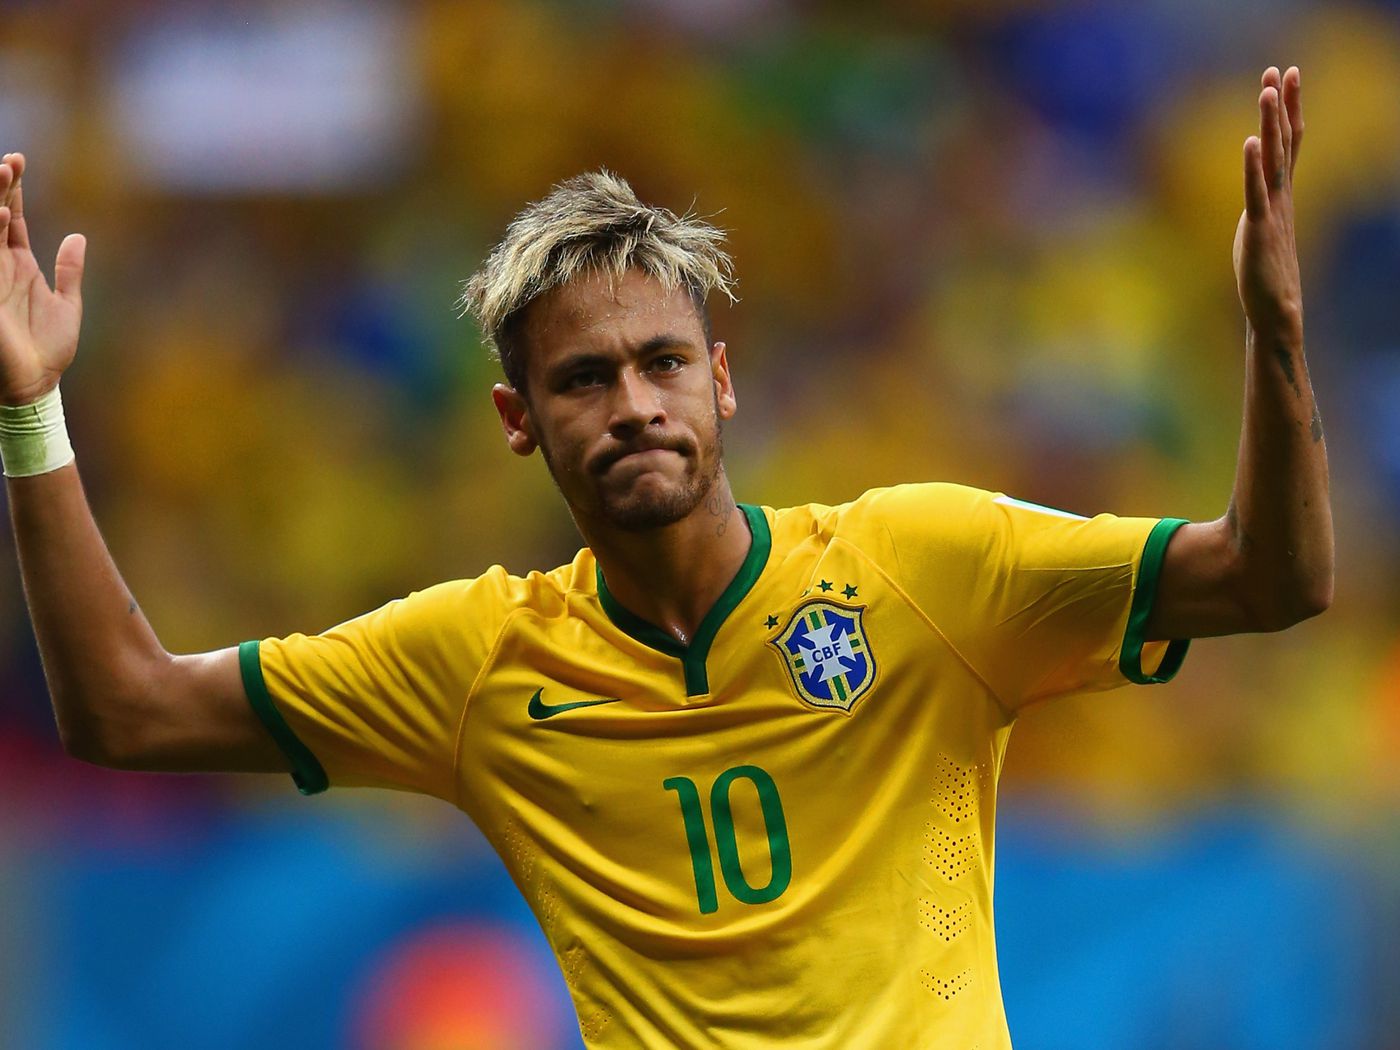 Reconfirming Four Year Old News: Neymar Rejected Chelsea In 2010 Ain't Got No History